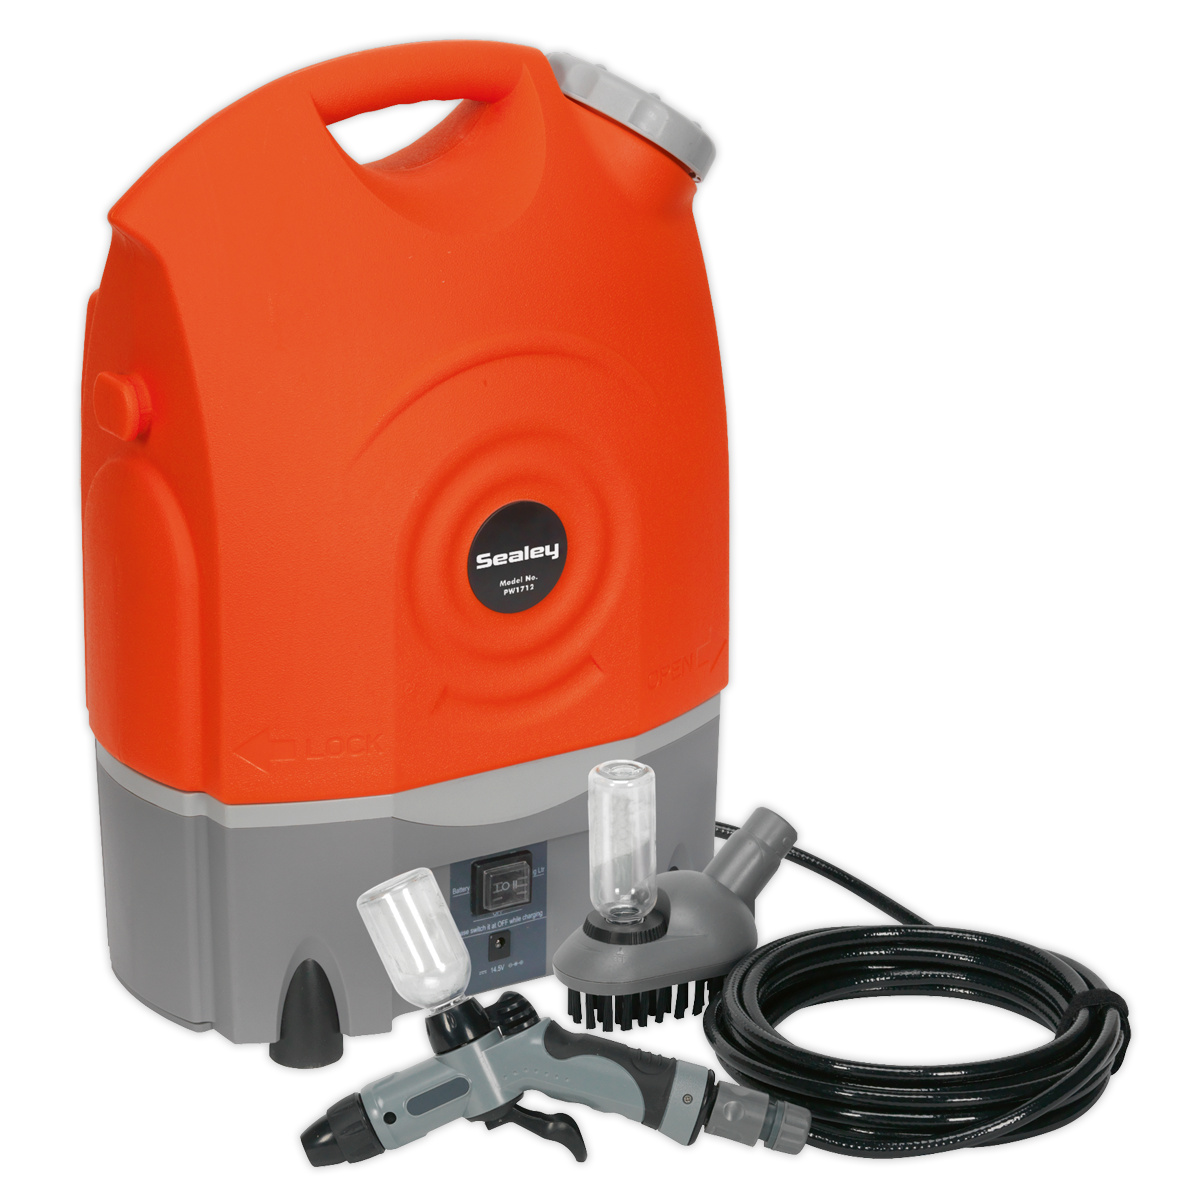 Pressure Washer 12V Rechargeable - PW1712 - Farming Parts